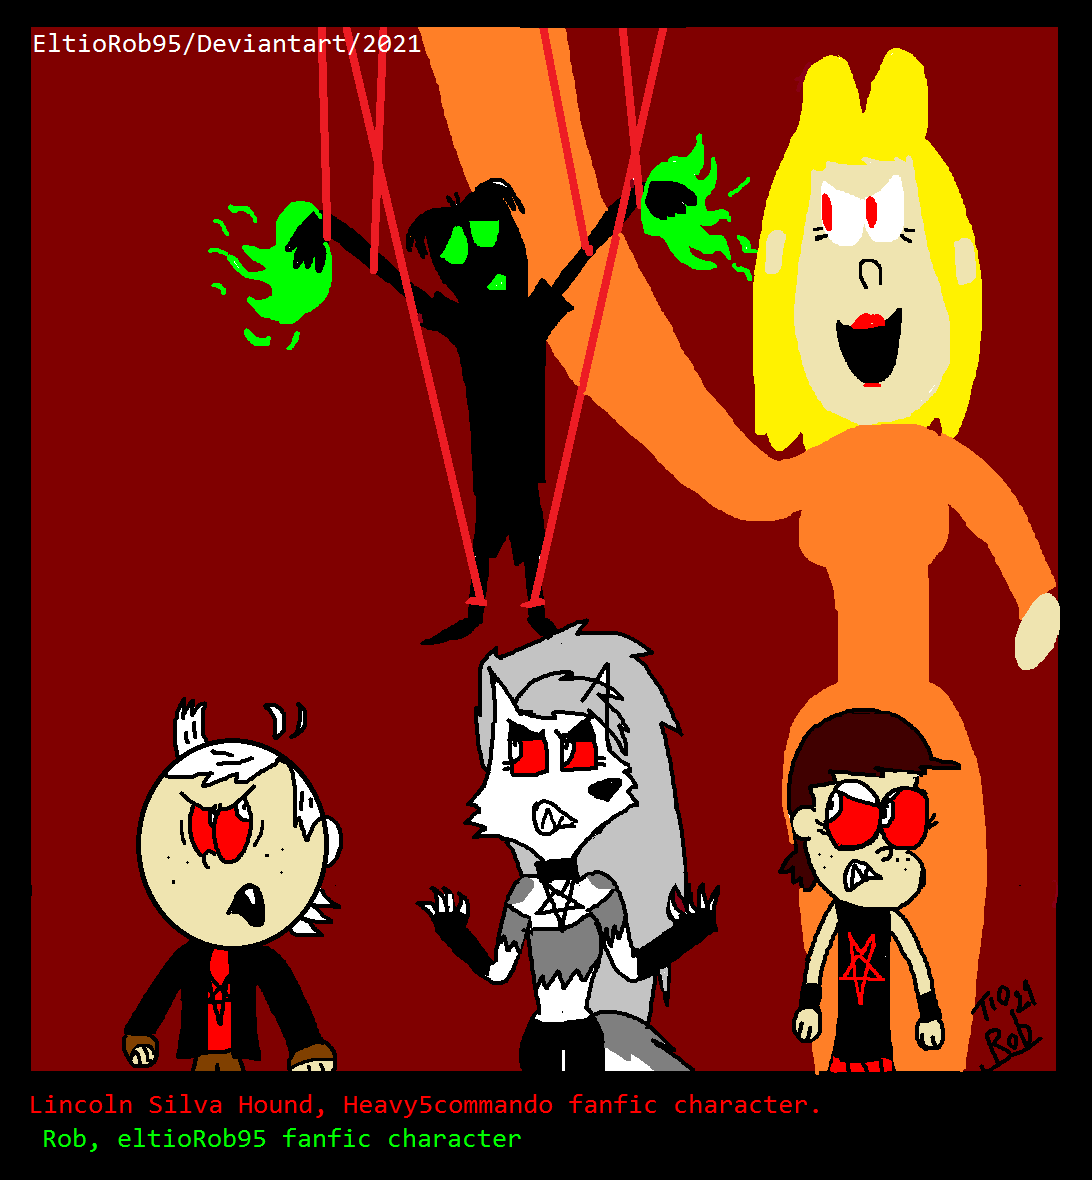 WELCOME TO HELL by rozhvector.deviantart.com on @DeviantArt